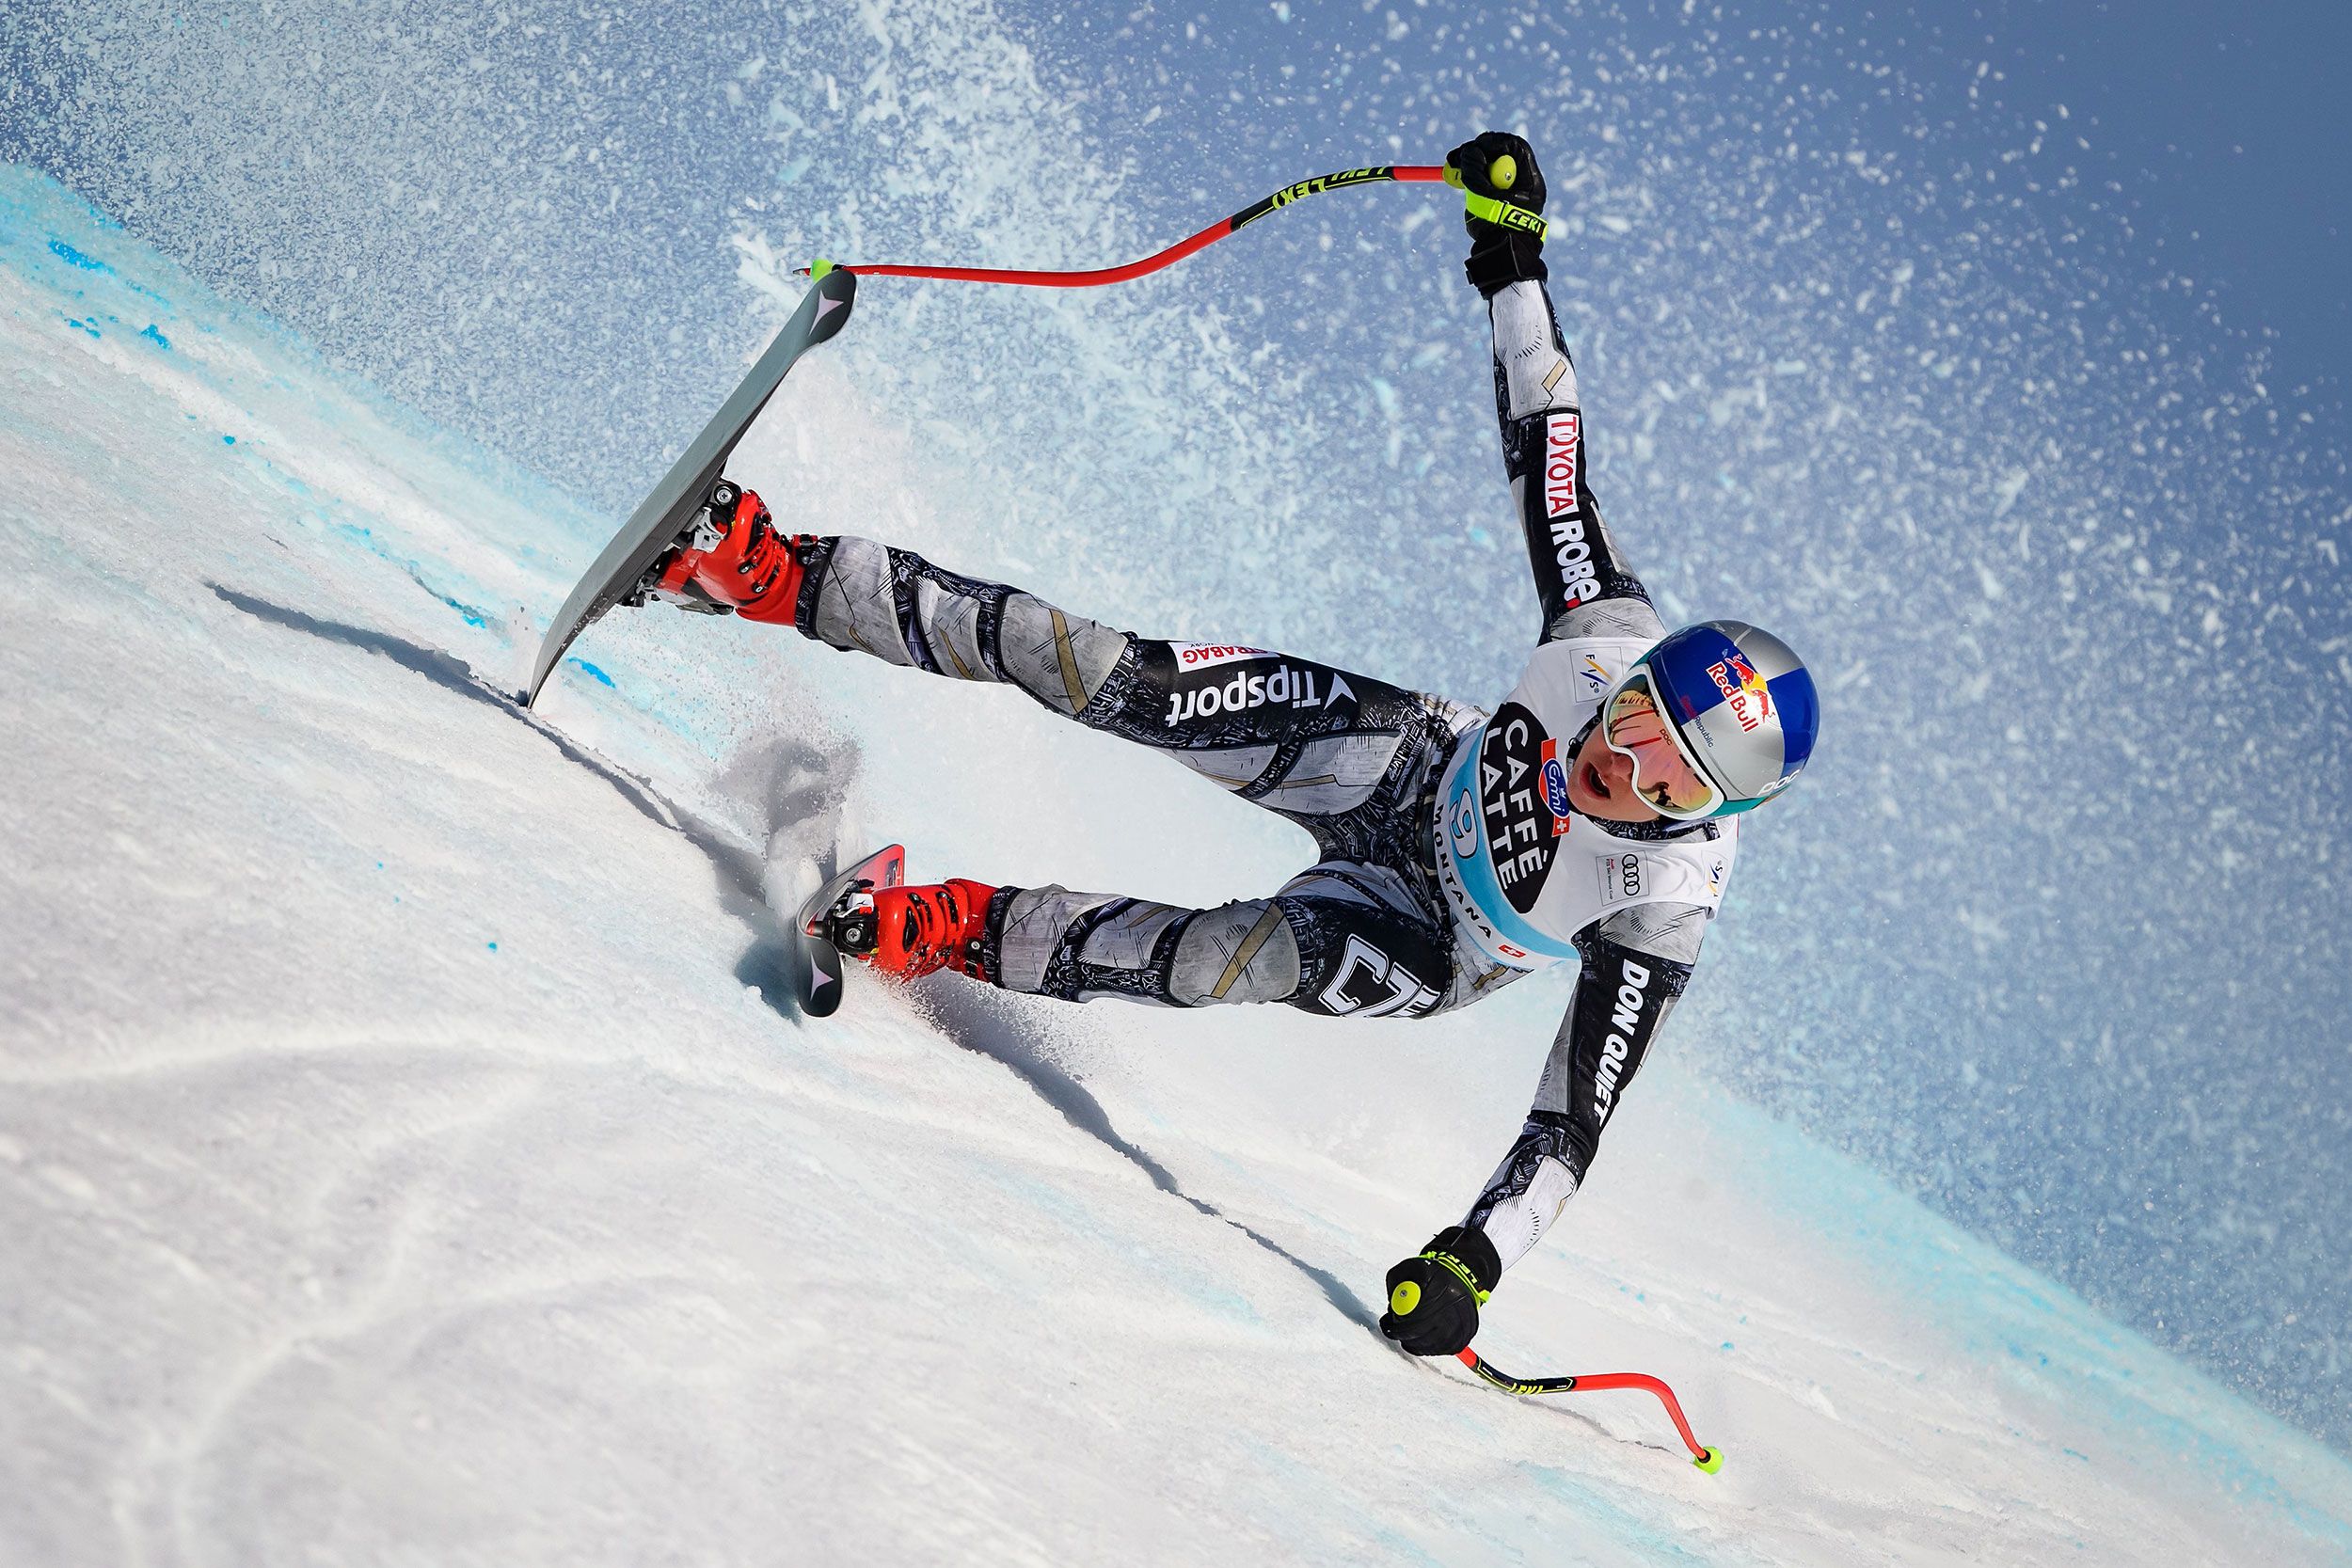 Winter Olympic athletes for brands to watch